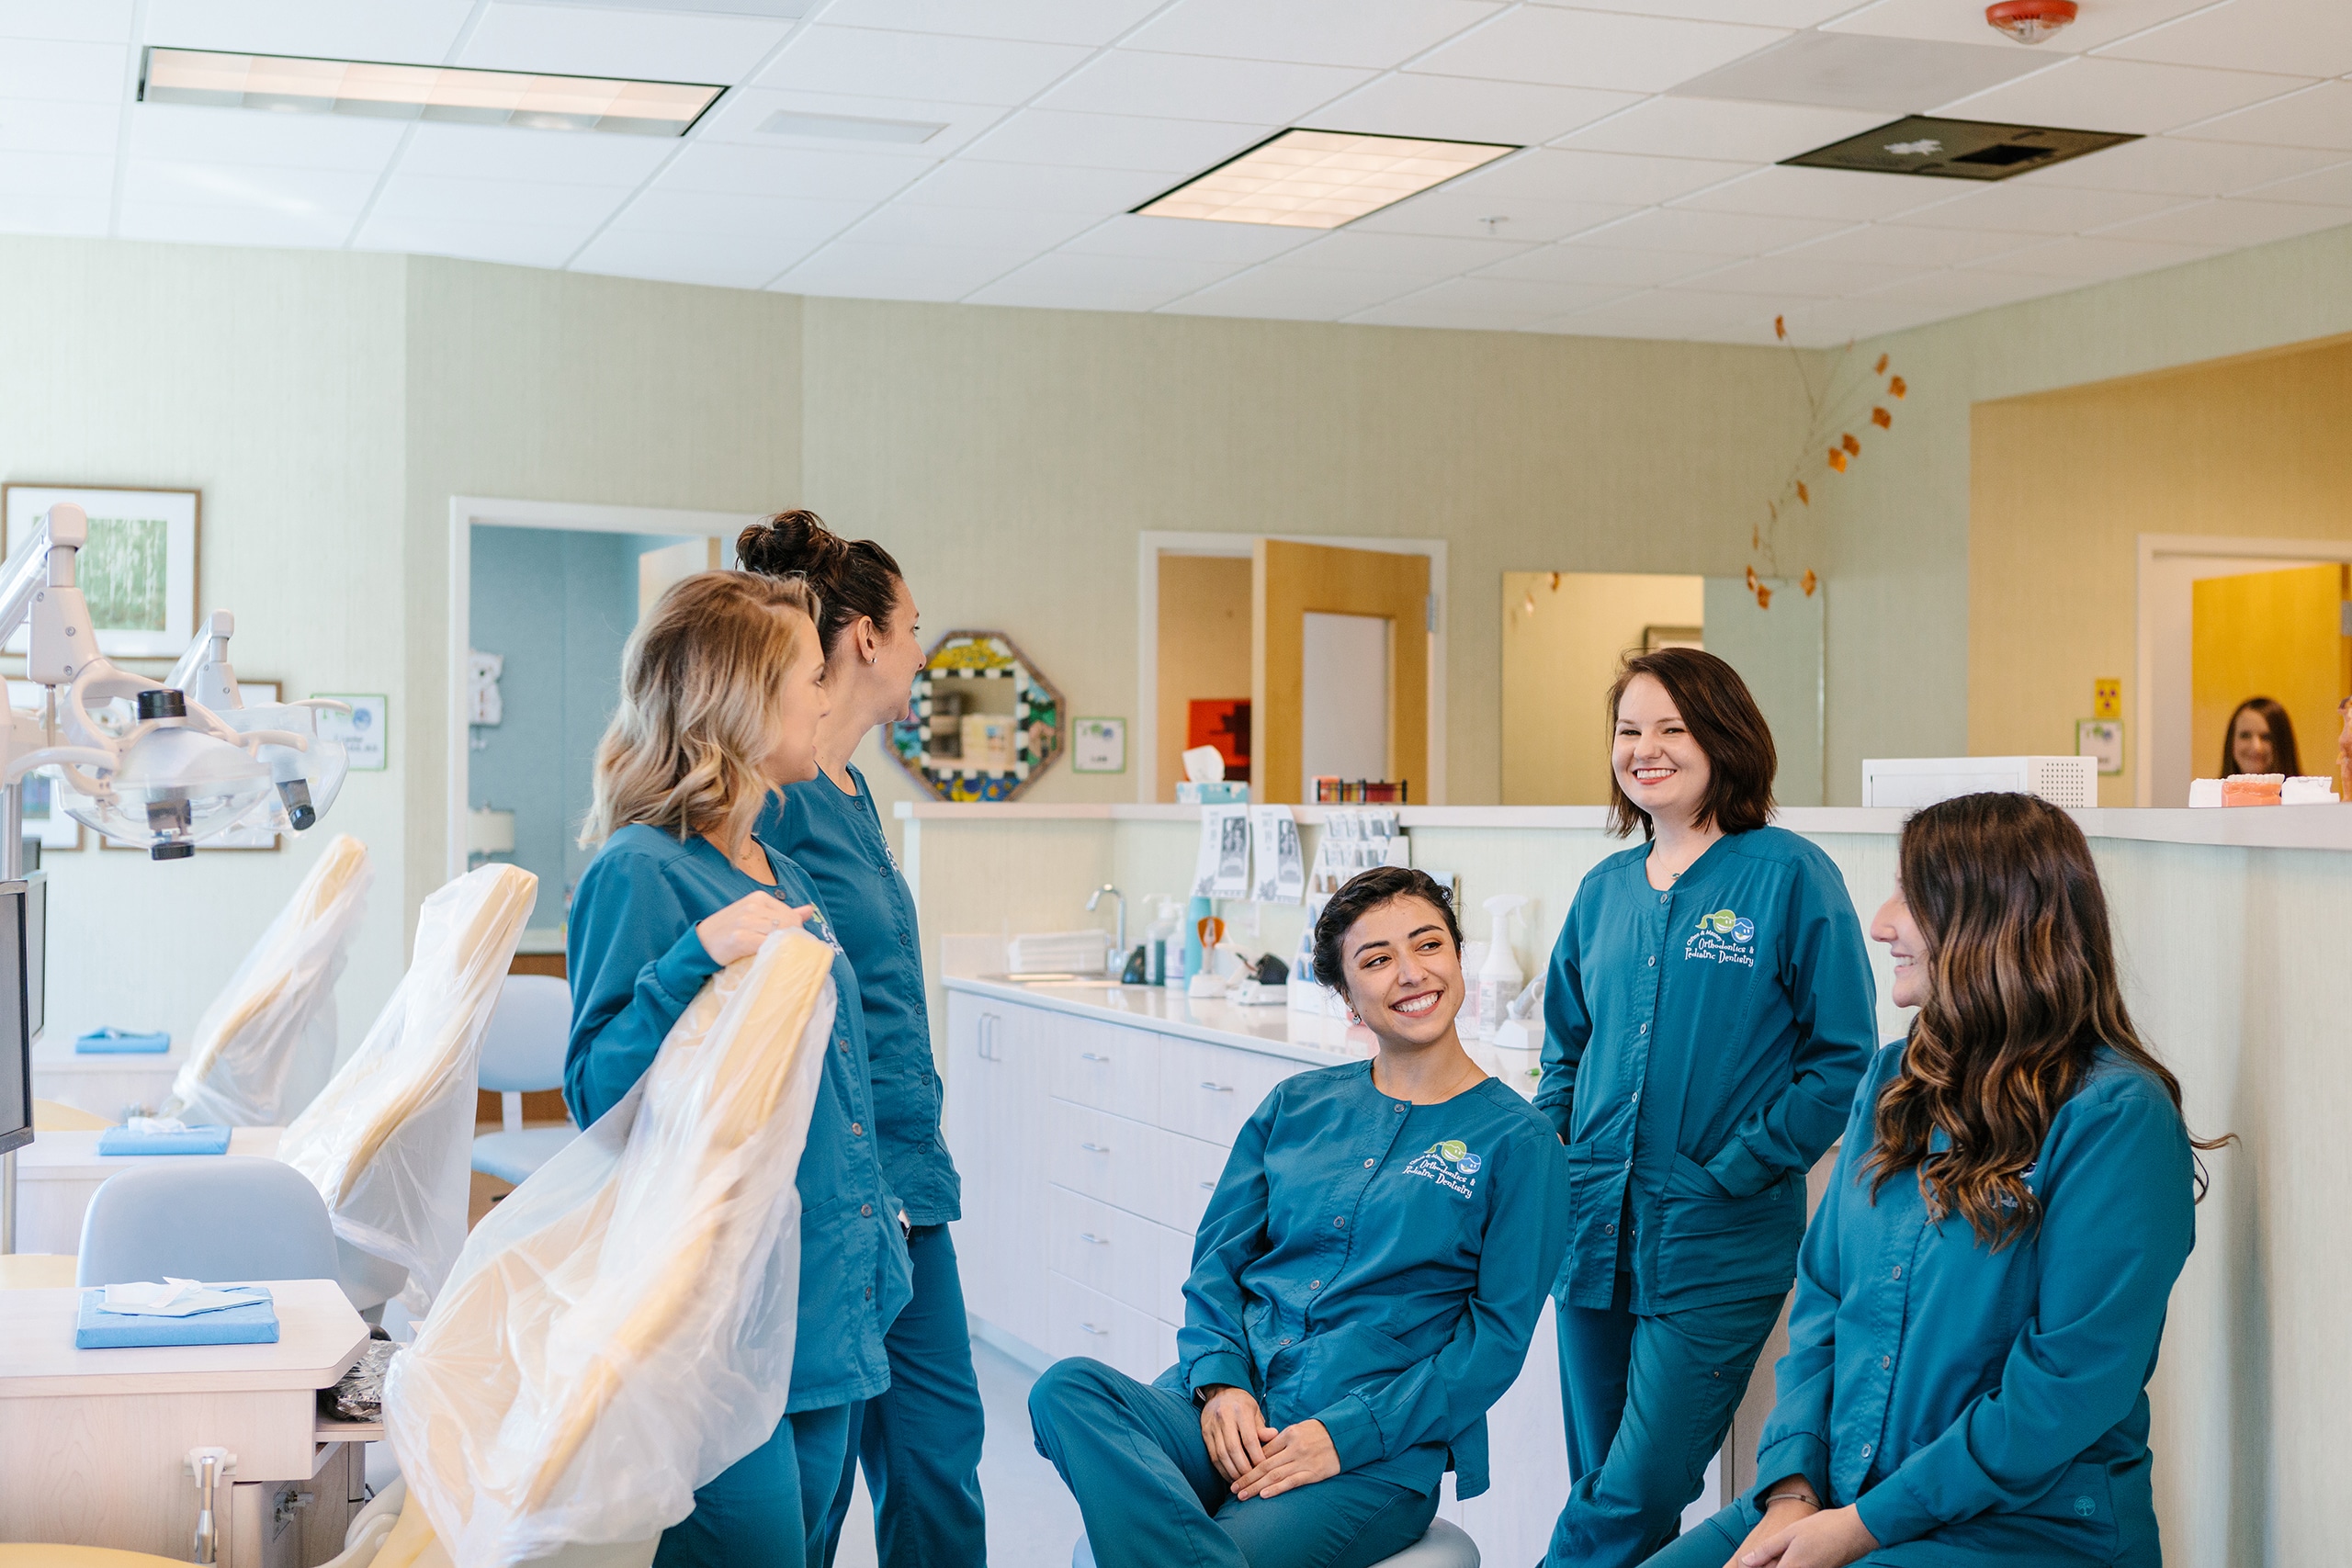 Four nurses in blue scrubs chatting in an exam room.